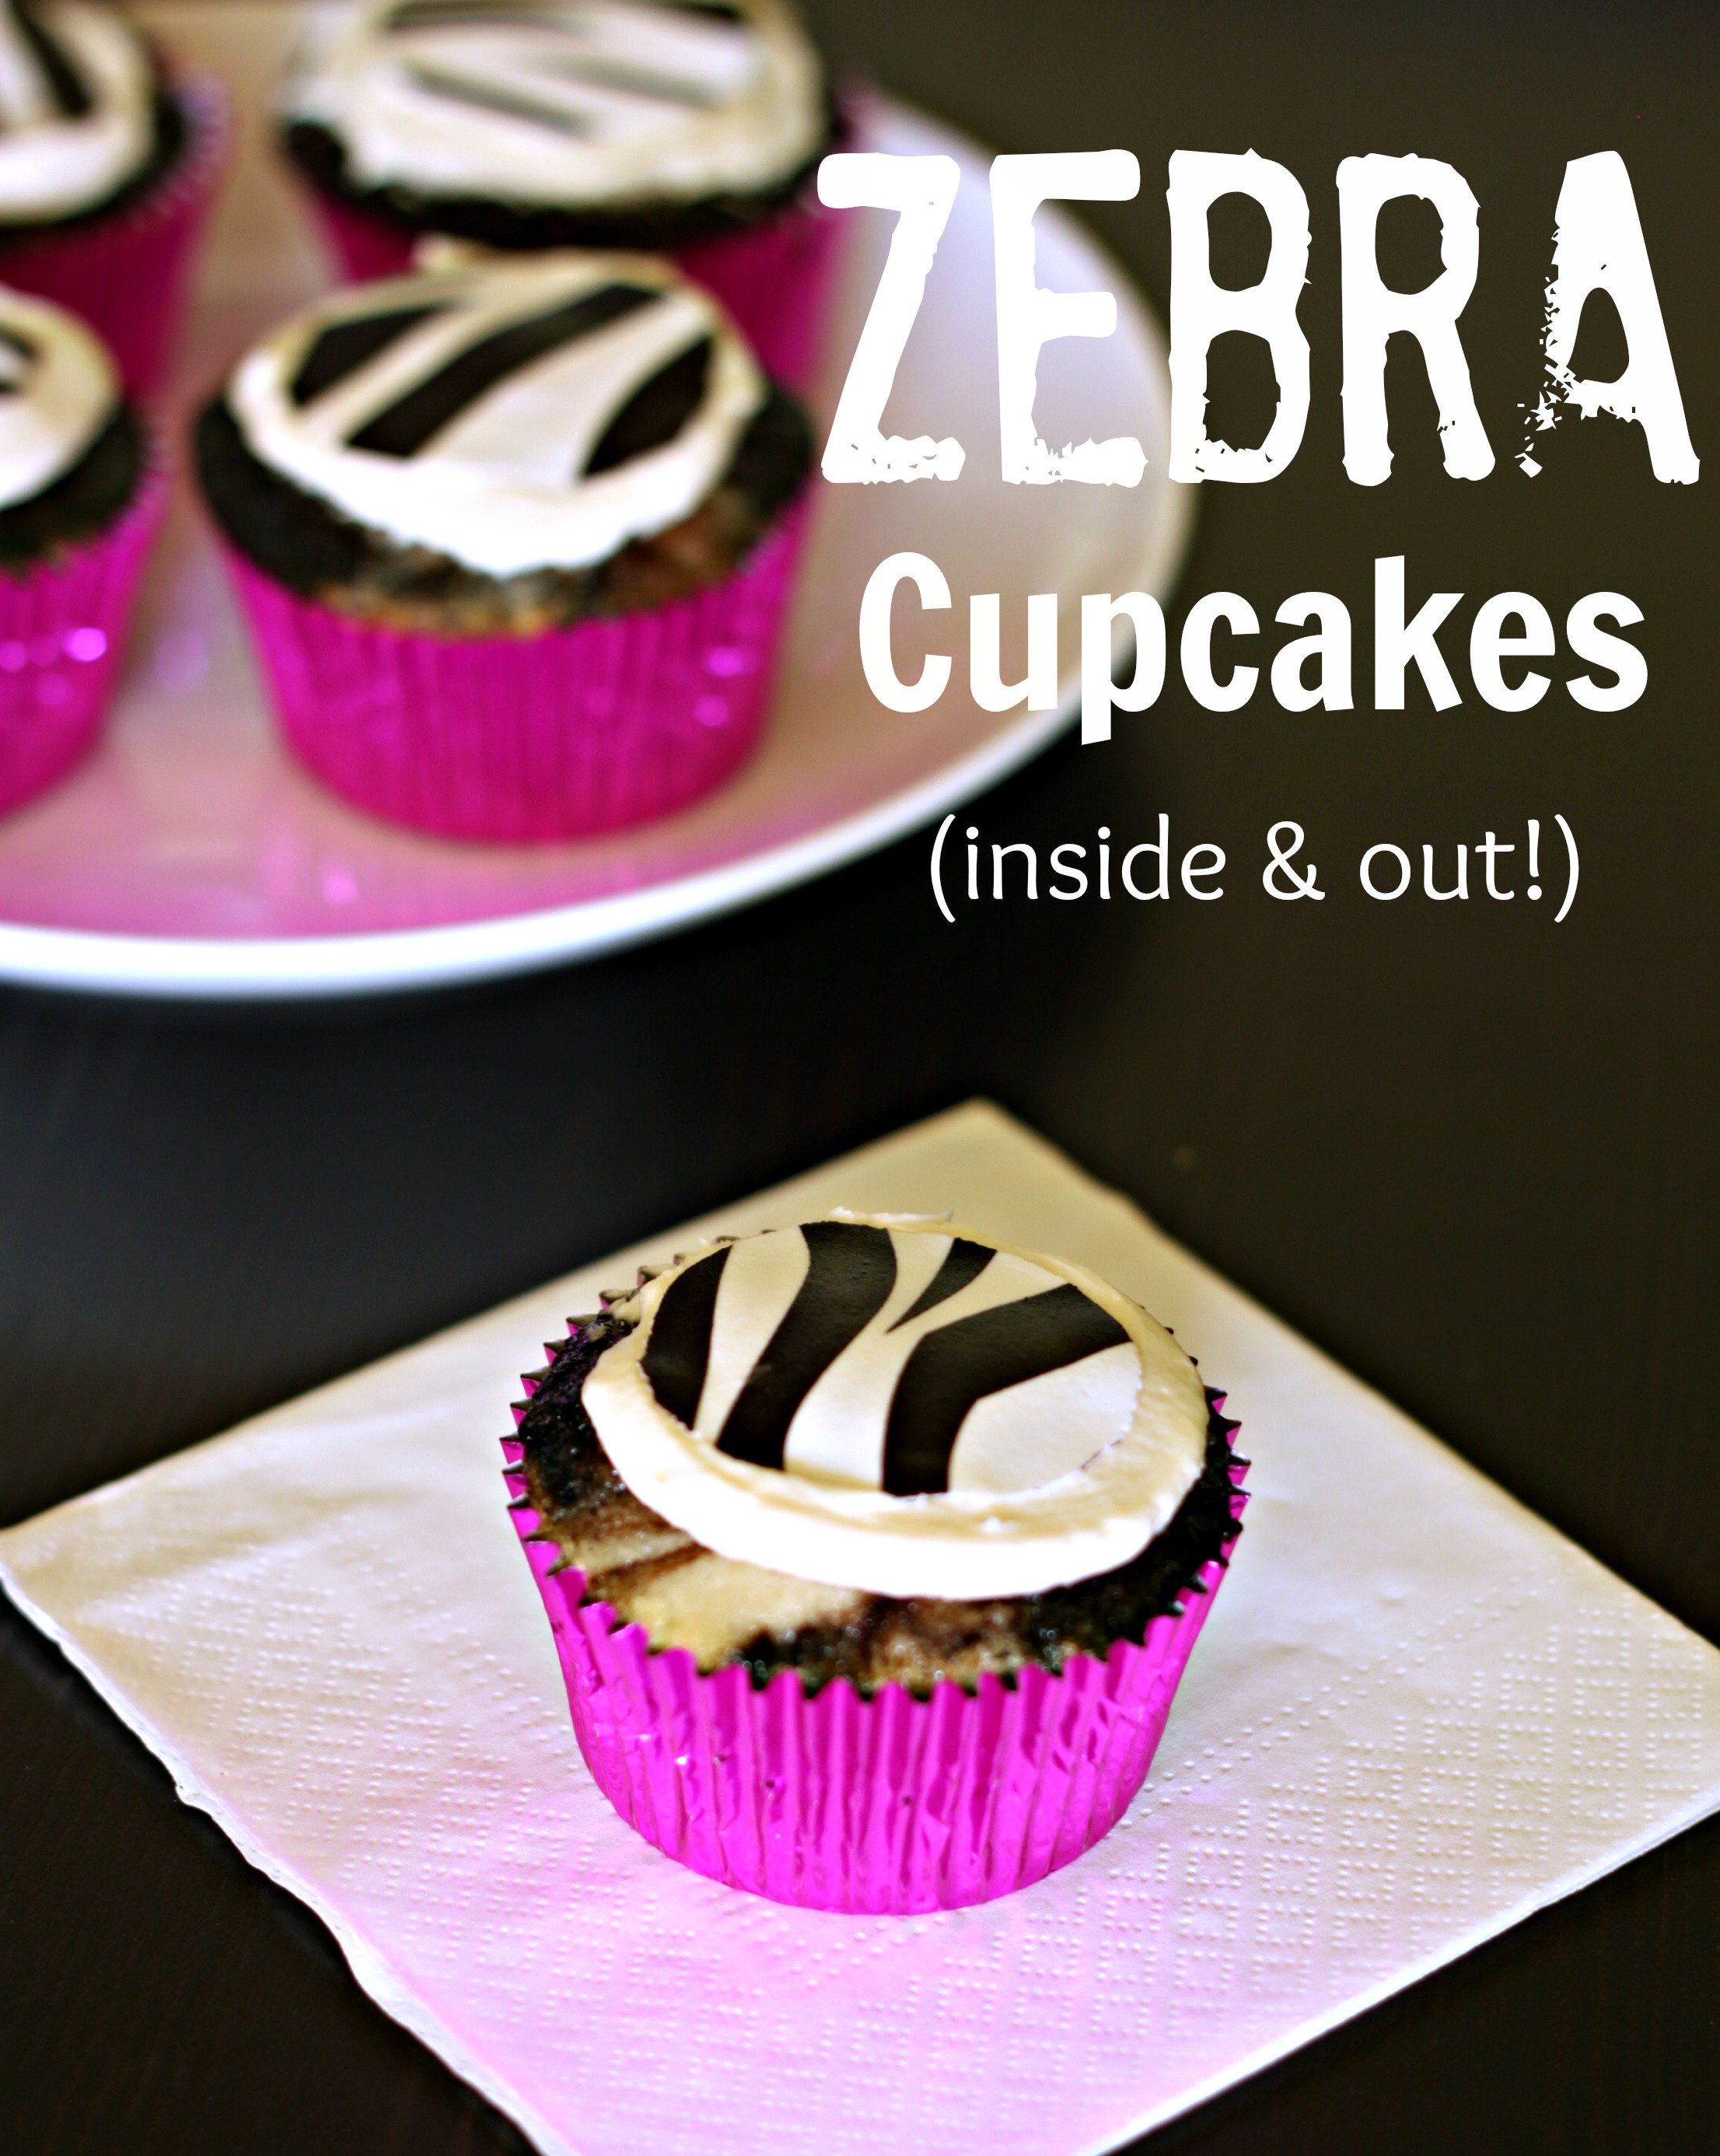 Zebra Cupcakes (inside & out!)